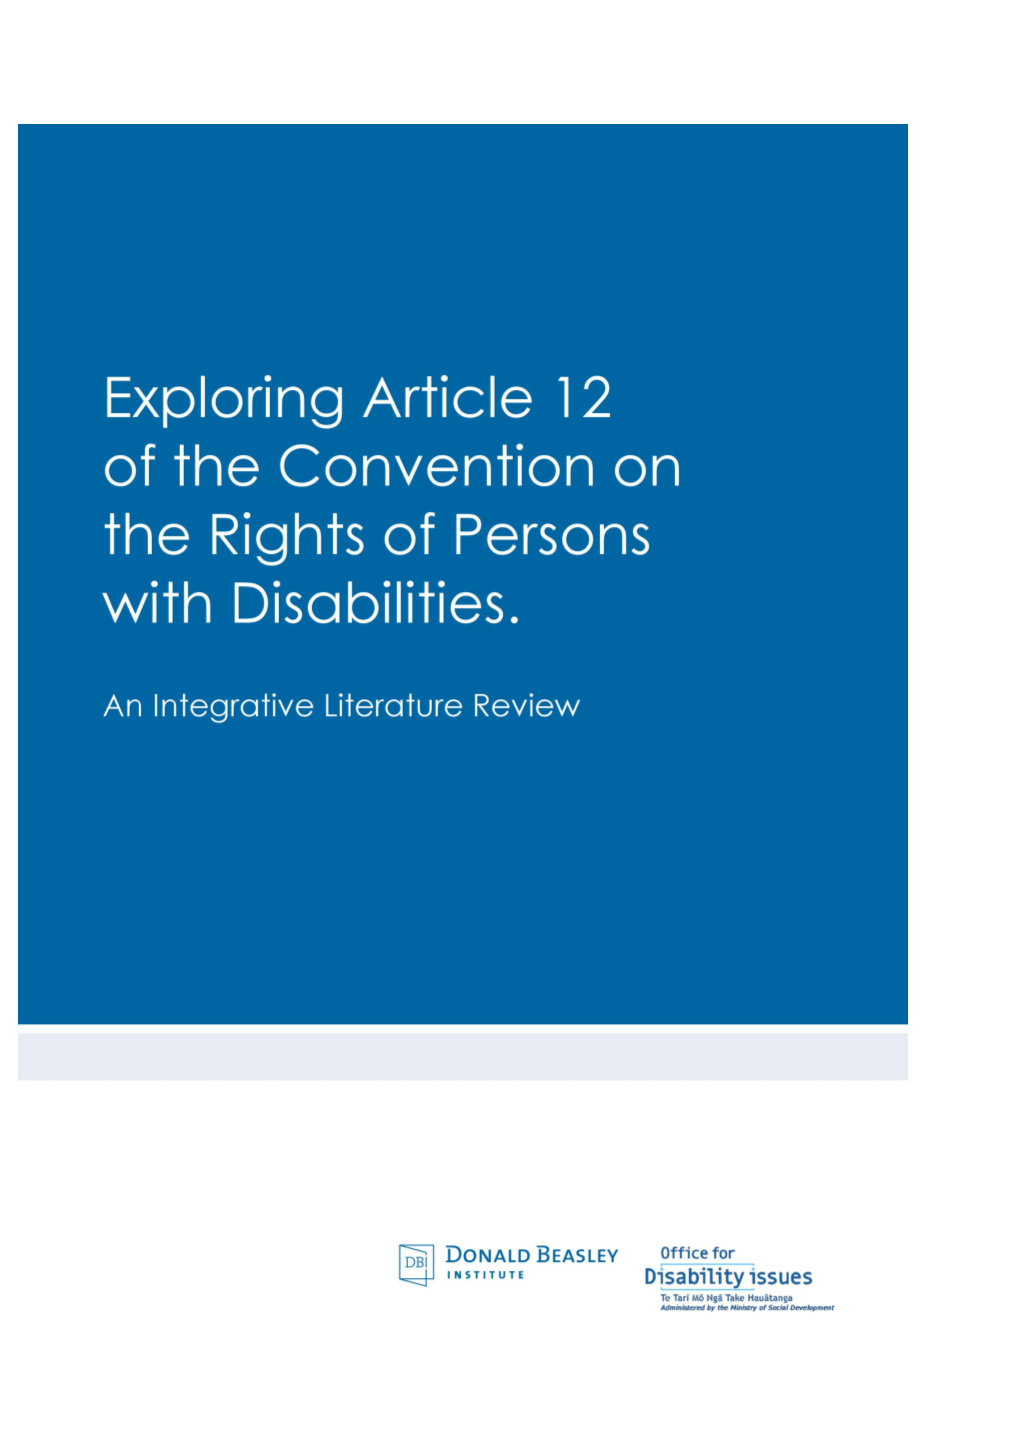 Exploring Article 12 of the United Nations Convention on the Rights of Persons With